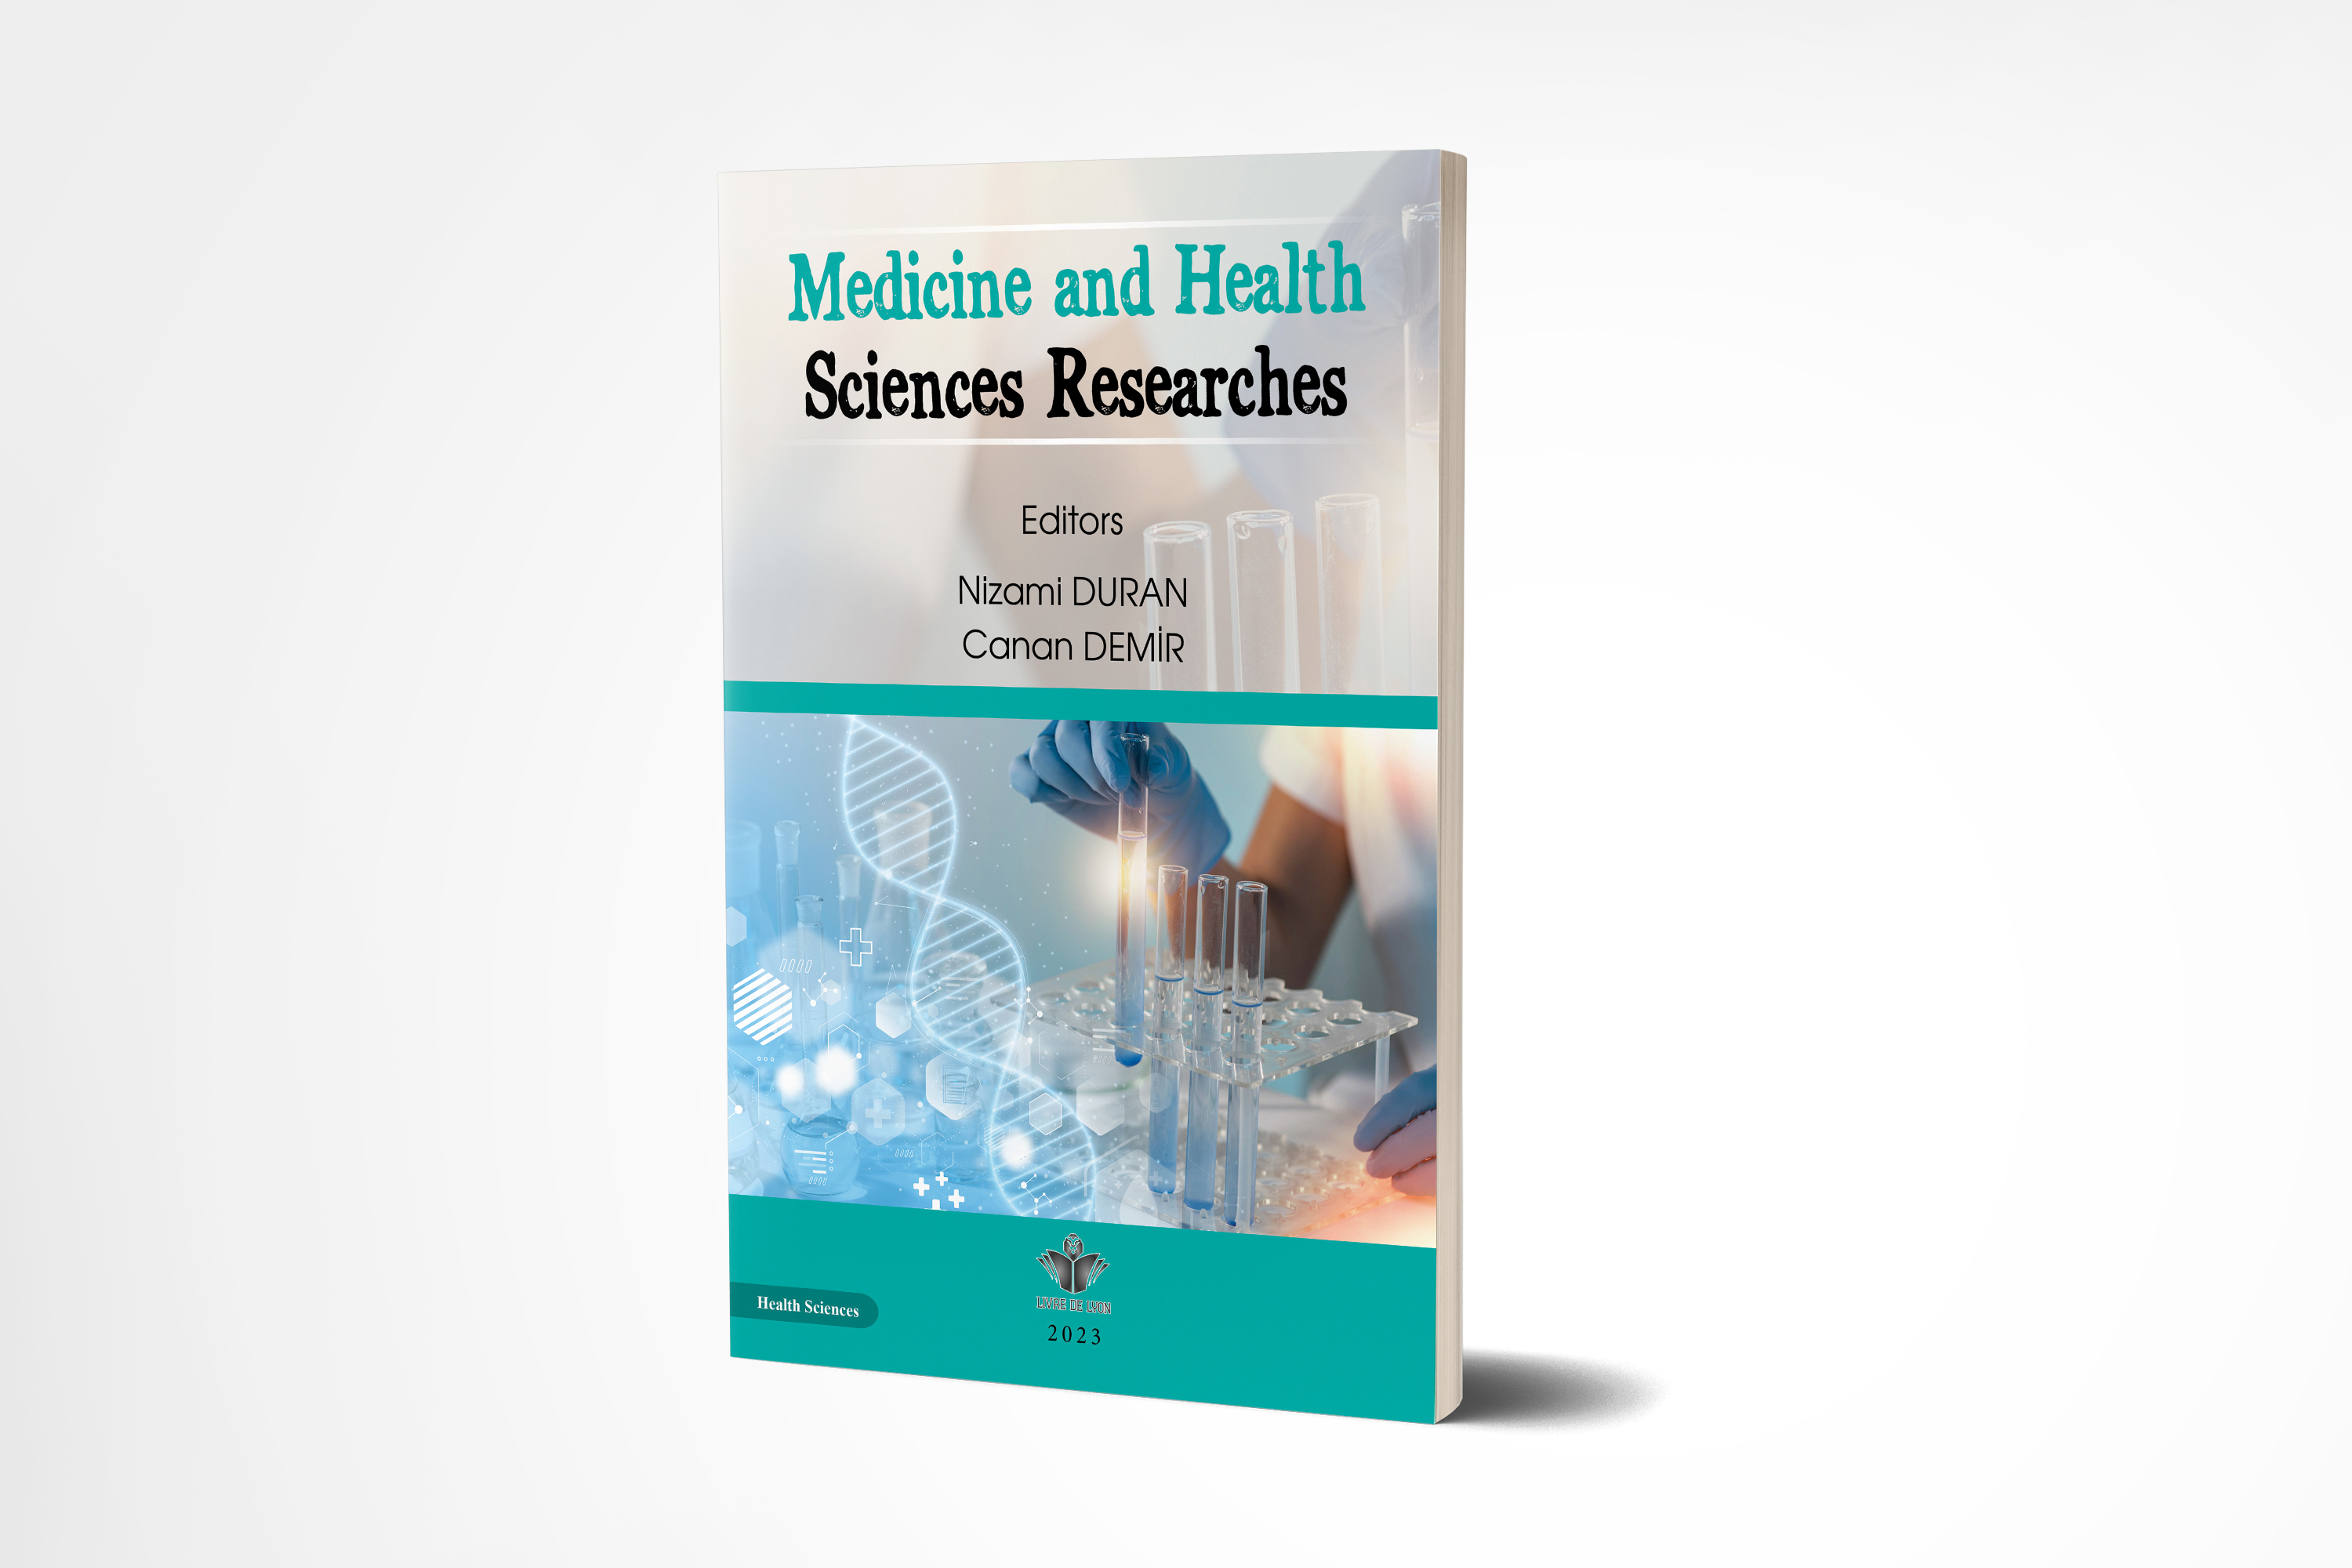 Medicine and Health Sciences Researches